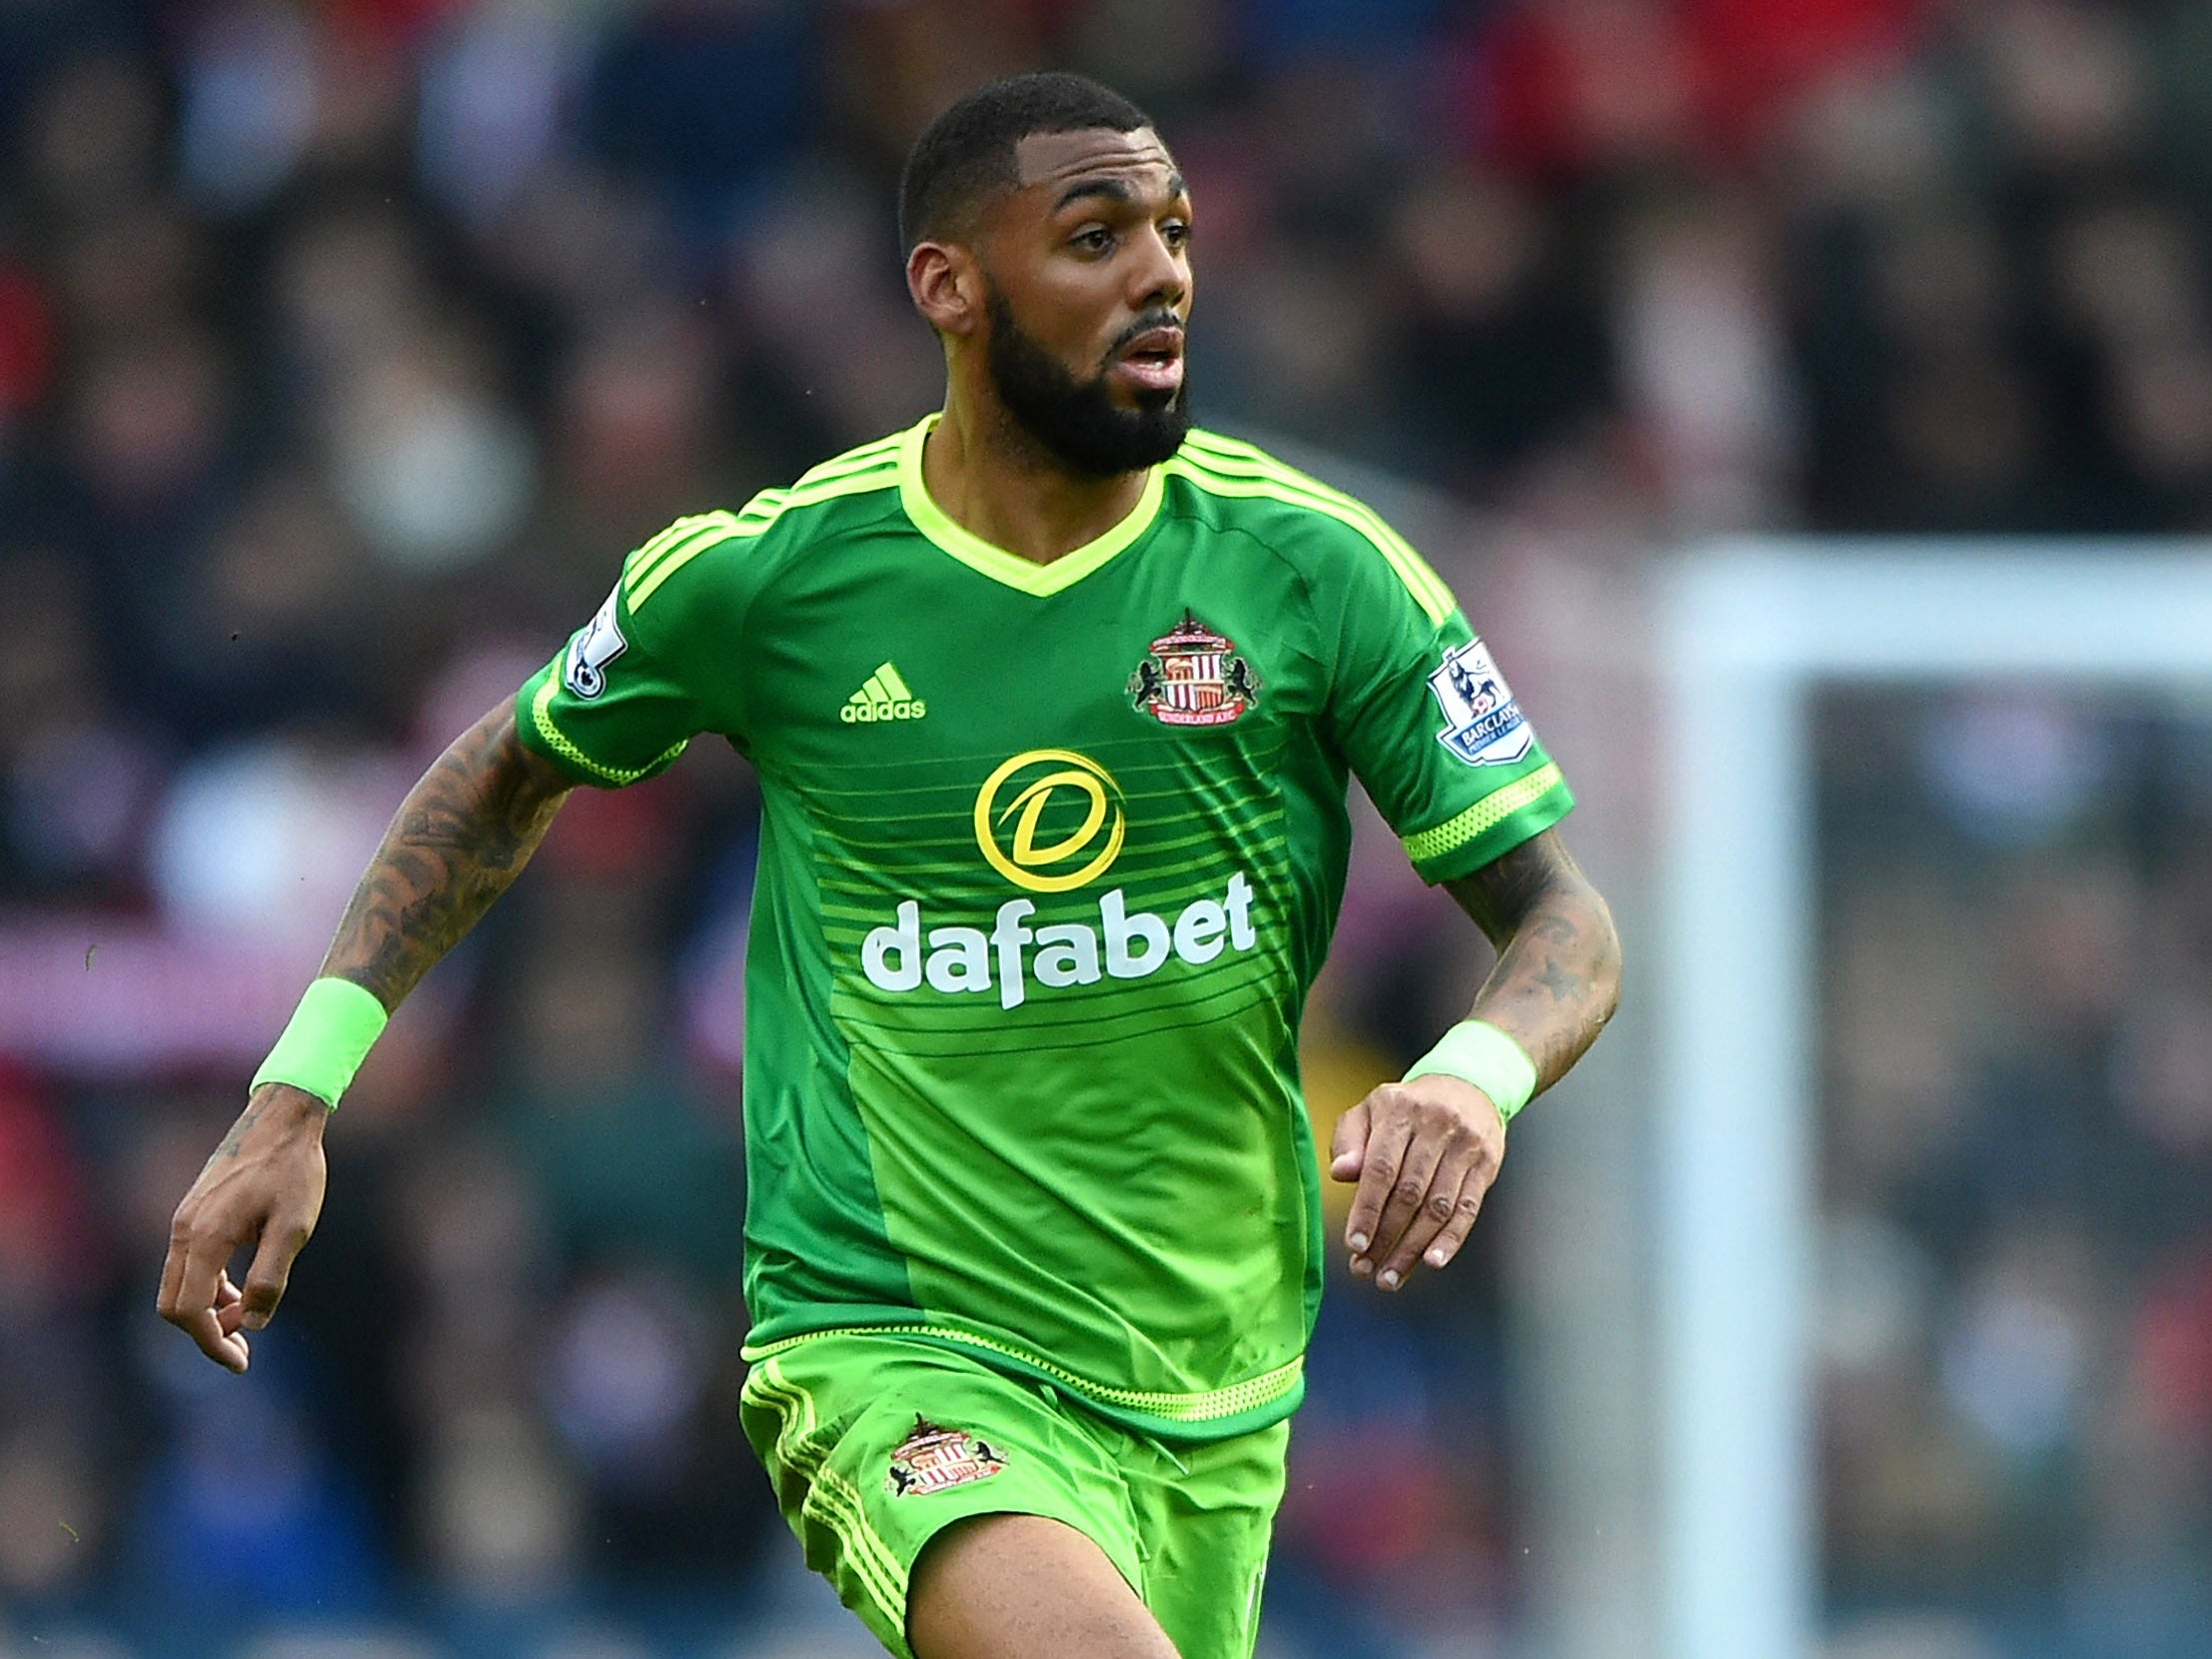 French midfielder Yann M'Vila proved a valuable addition to the Sunderland team this season (Getty)